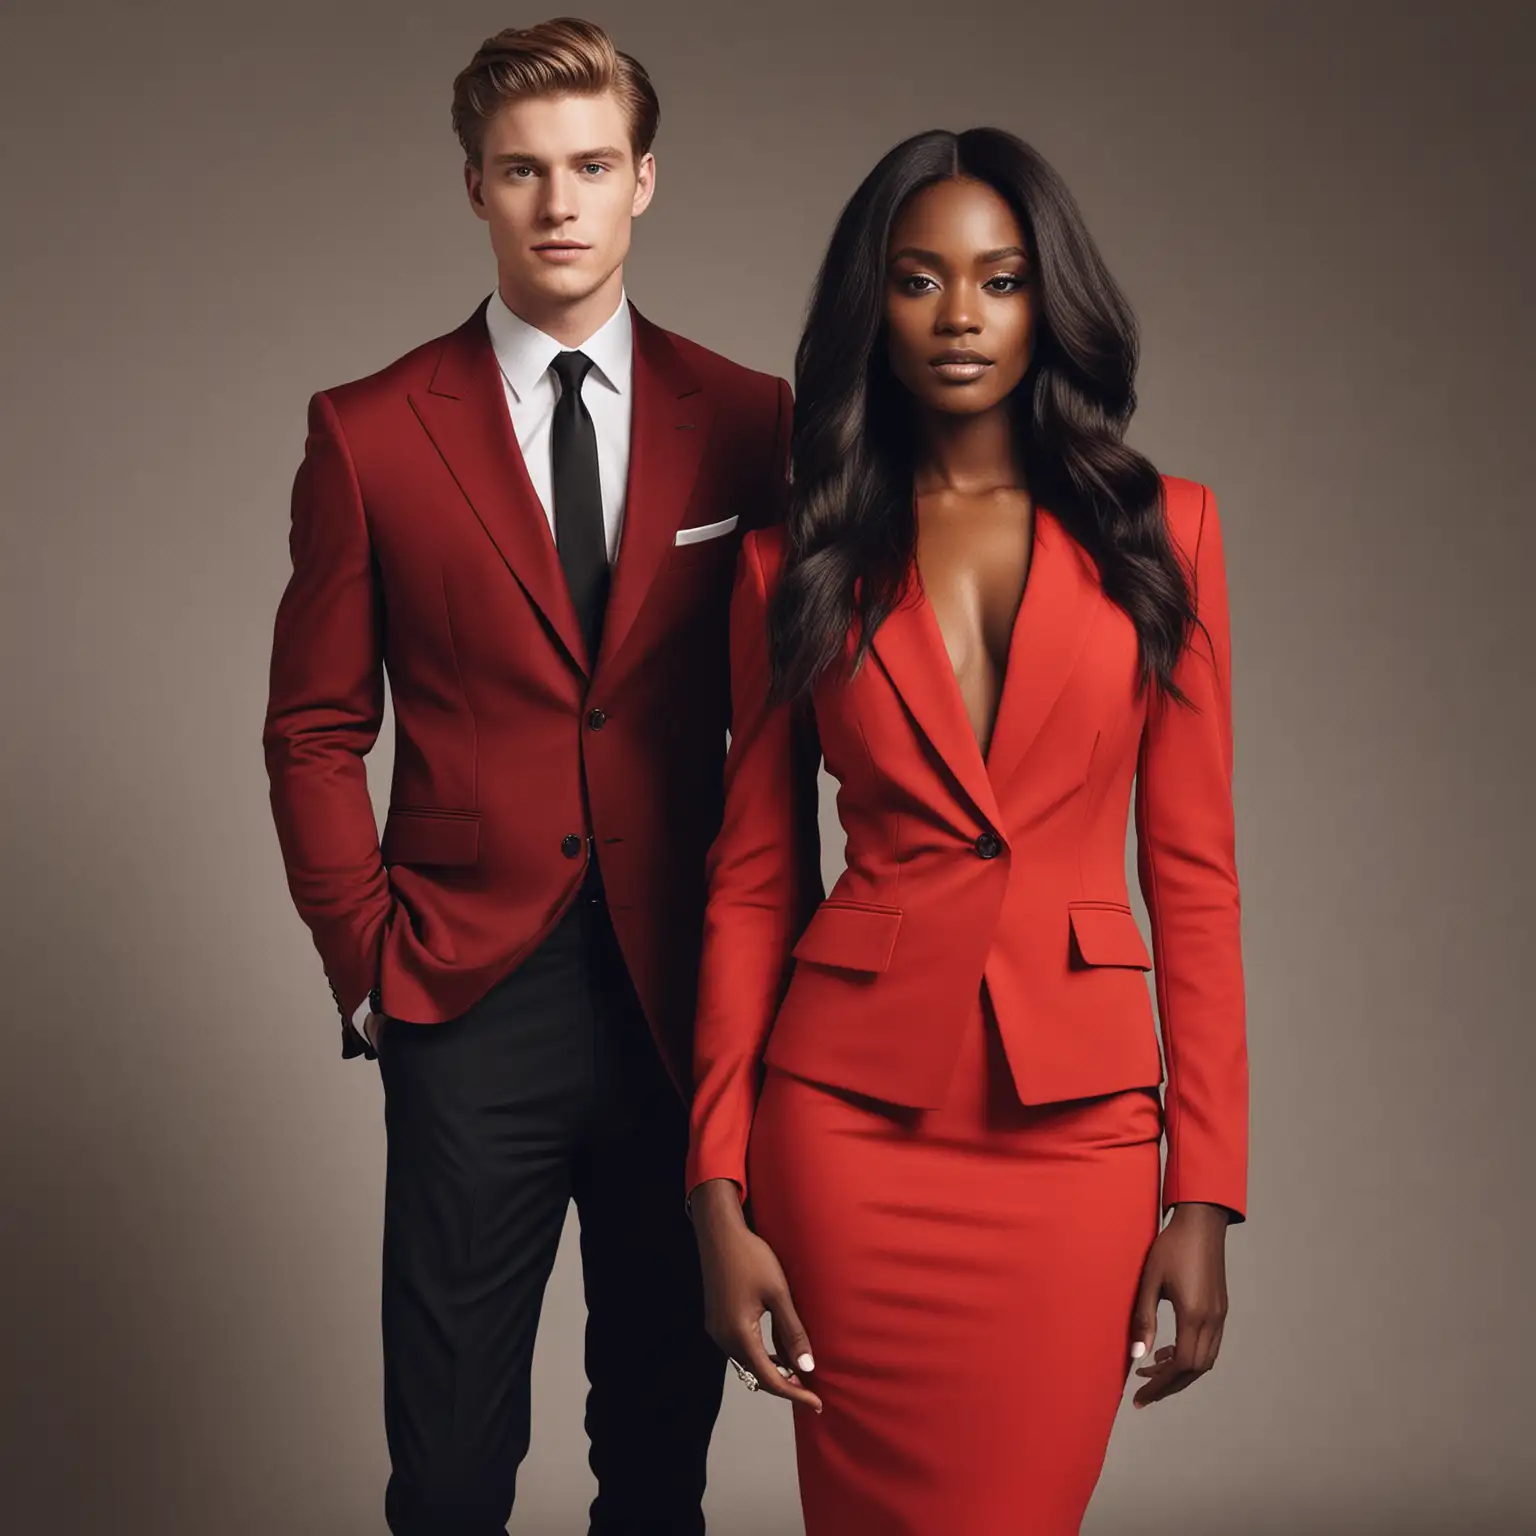 Elegant White Male Model in Suit and Stunning Black Woman in Red Dress